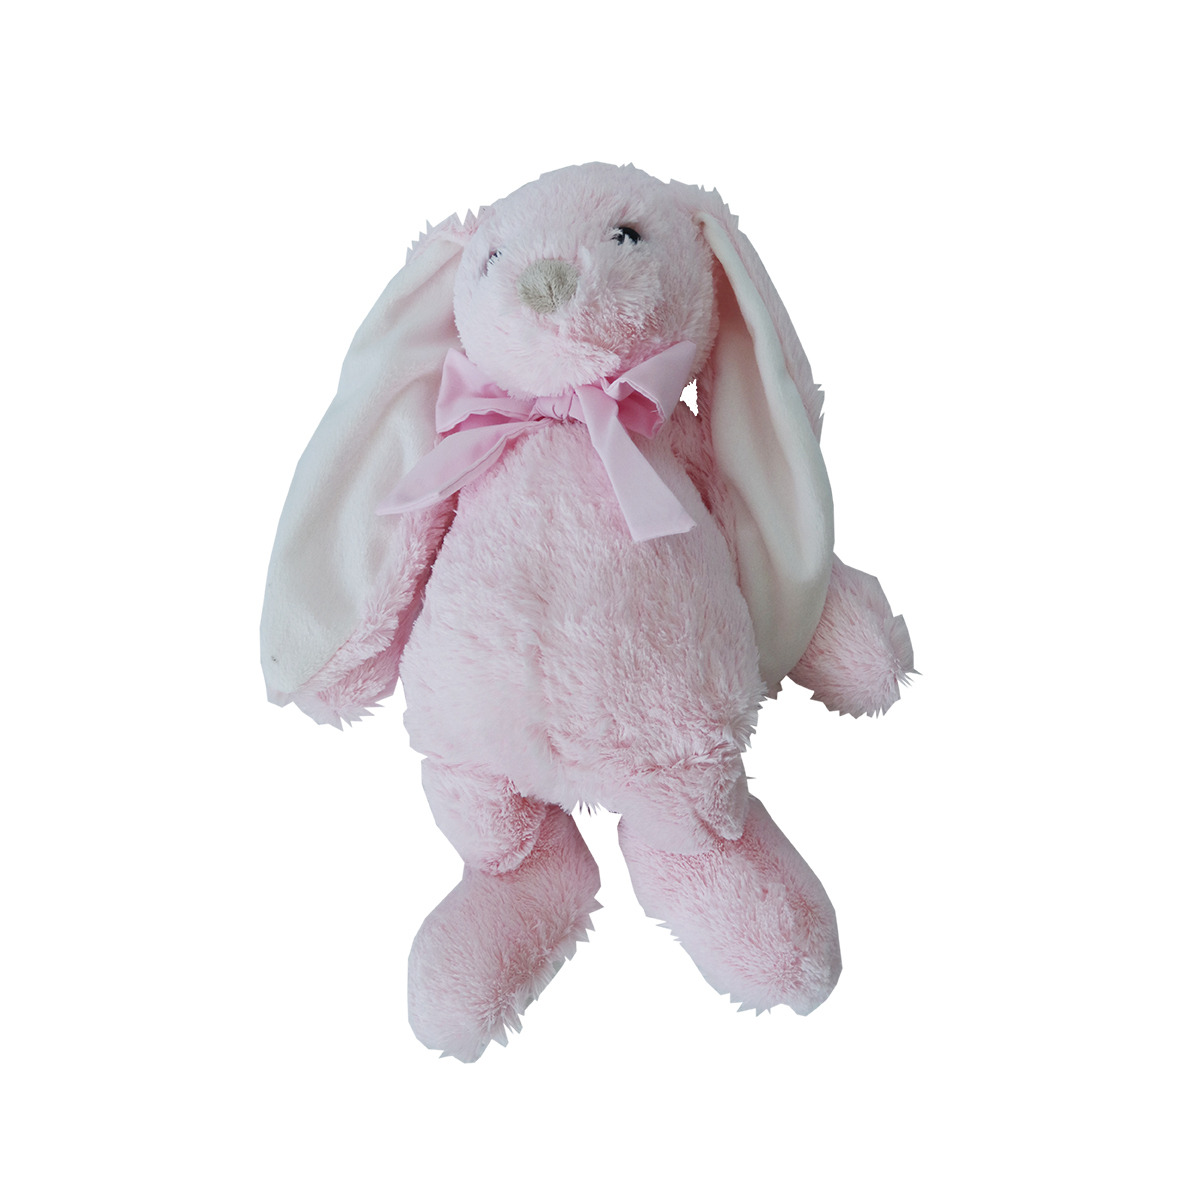 Snuggletime Classical Bunny Toy